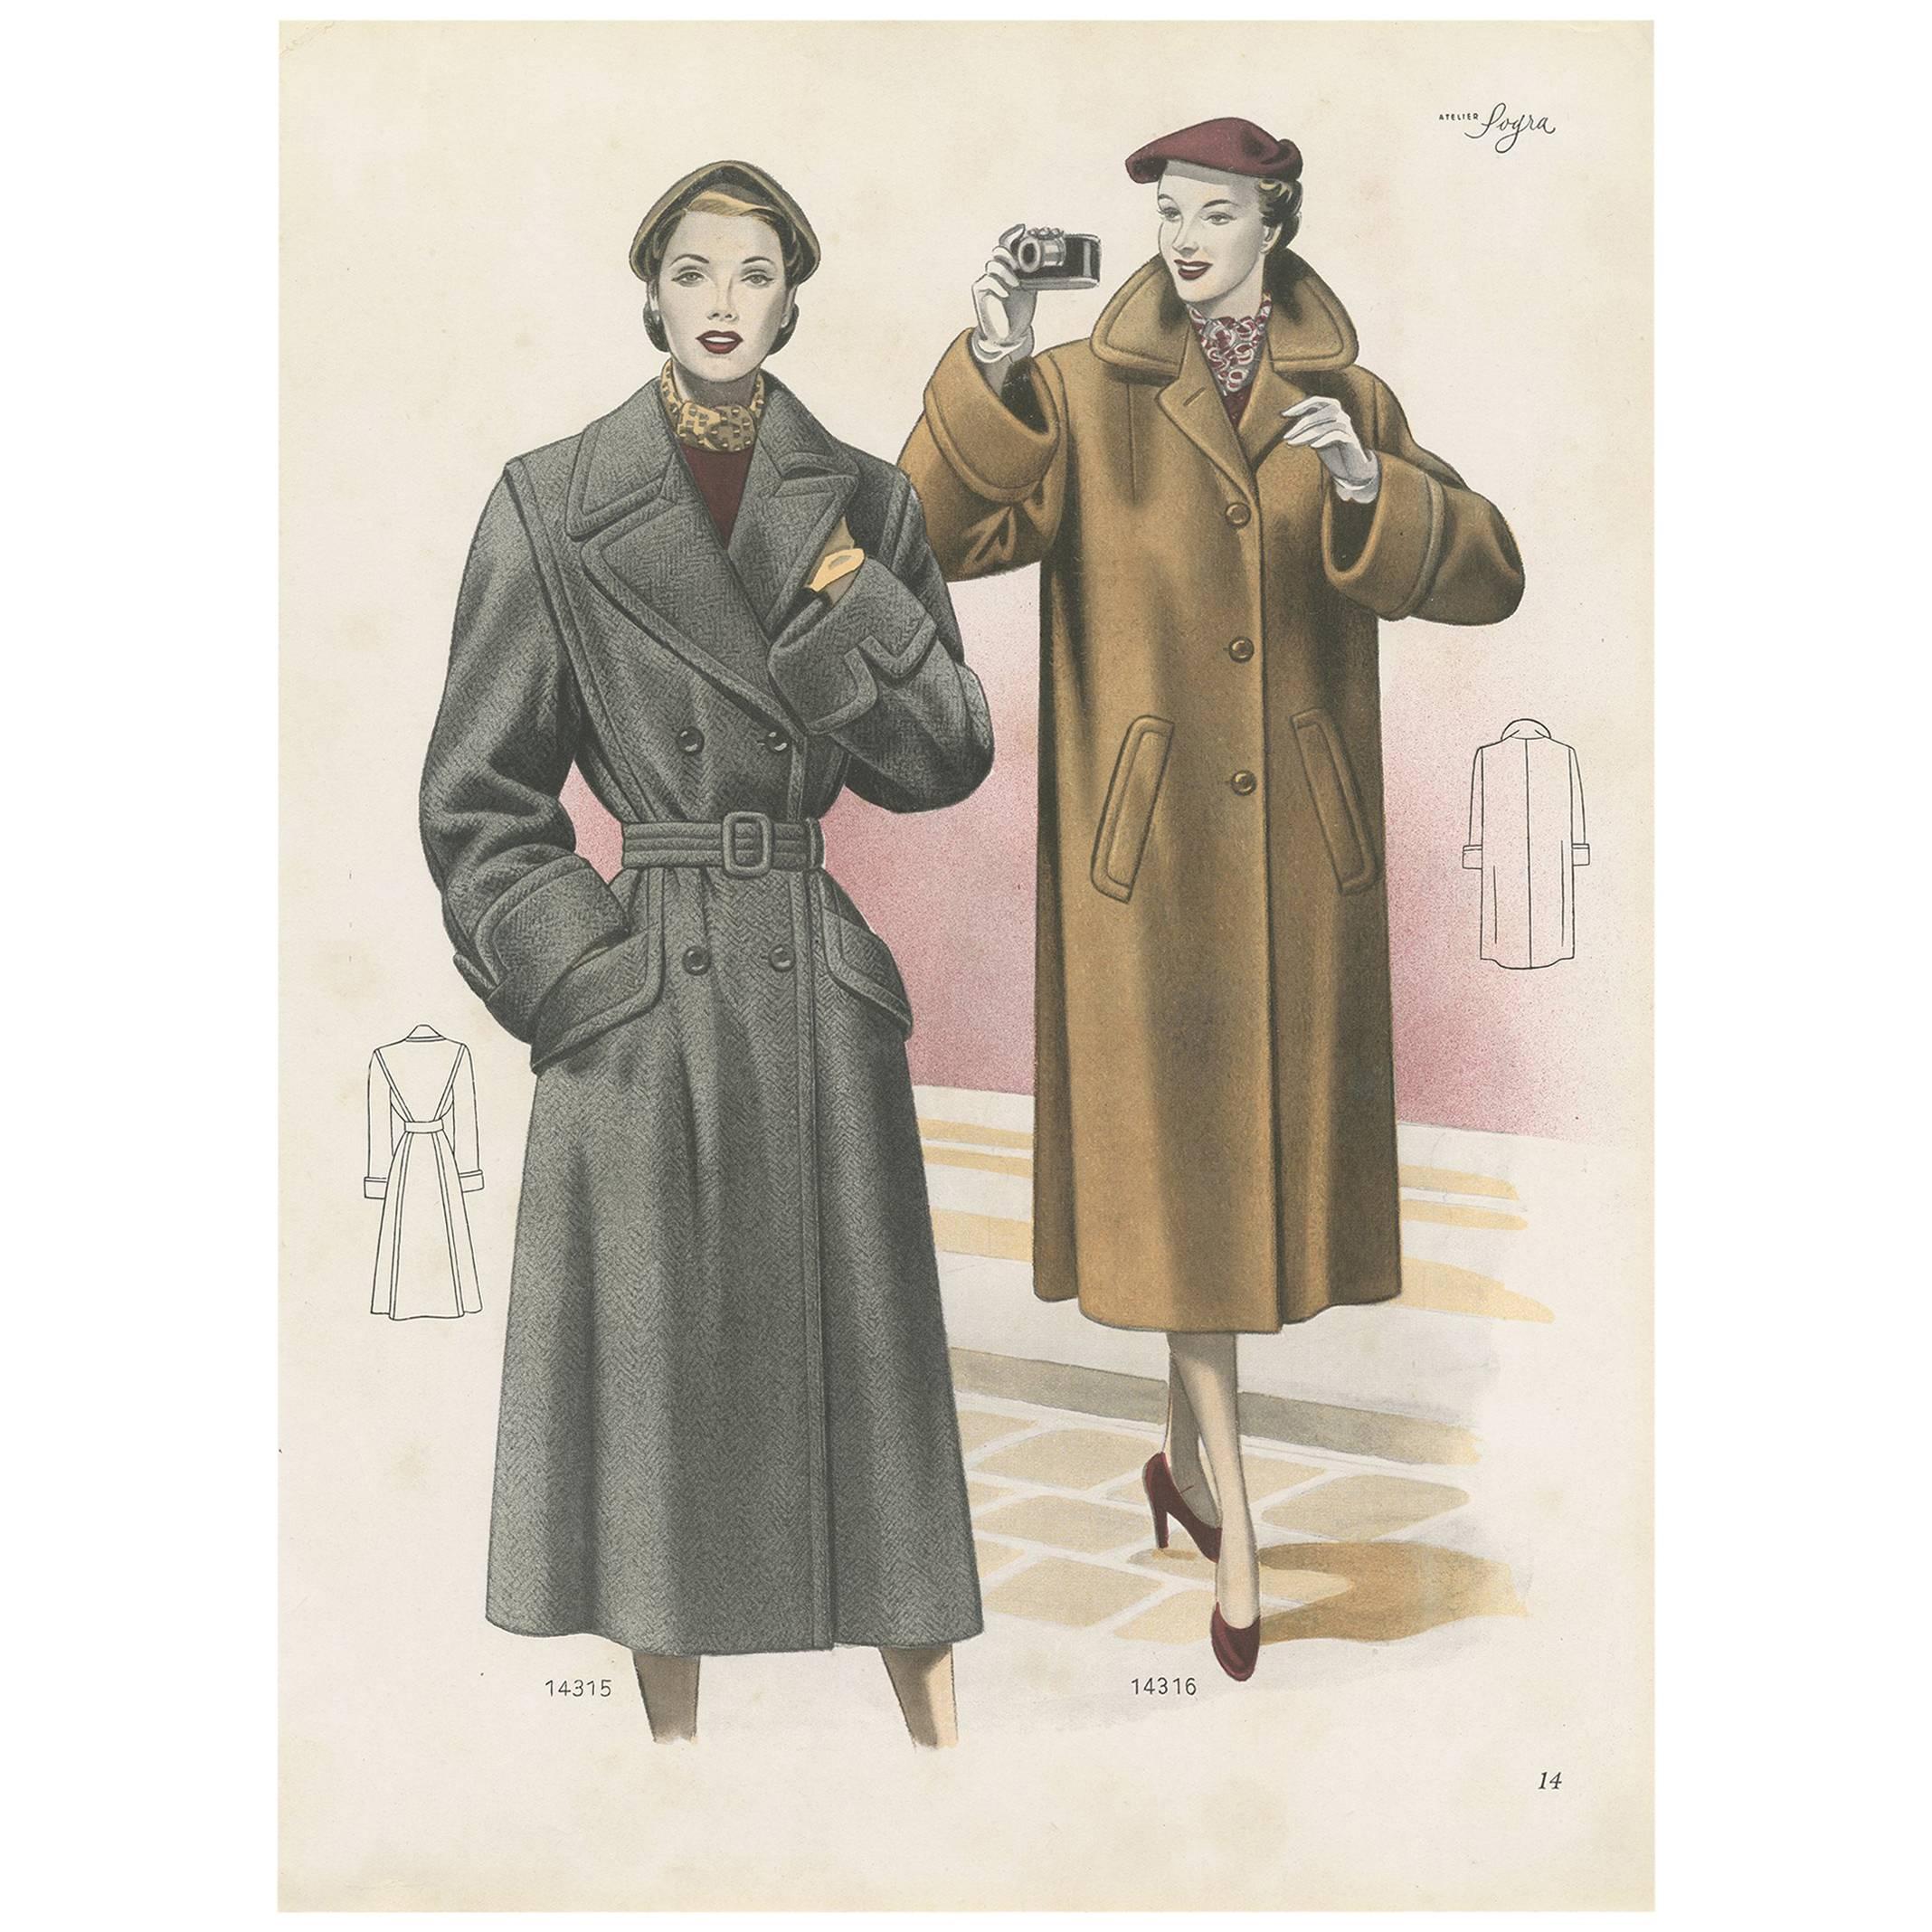 Vintage Fashion Print 'Pl. 14315' published in Ladies Styles, 1952 For Sale